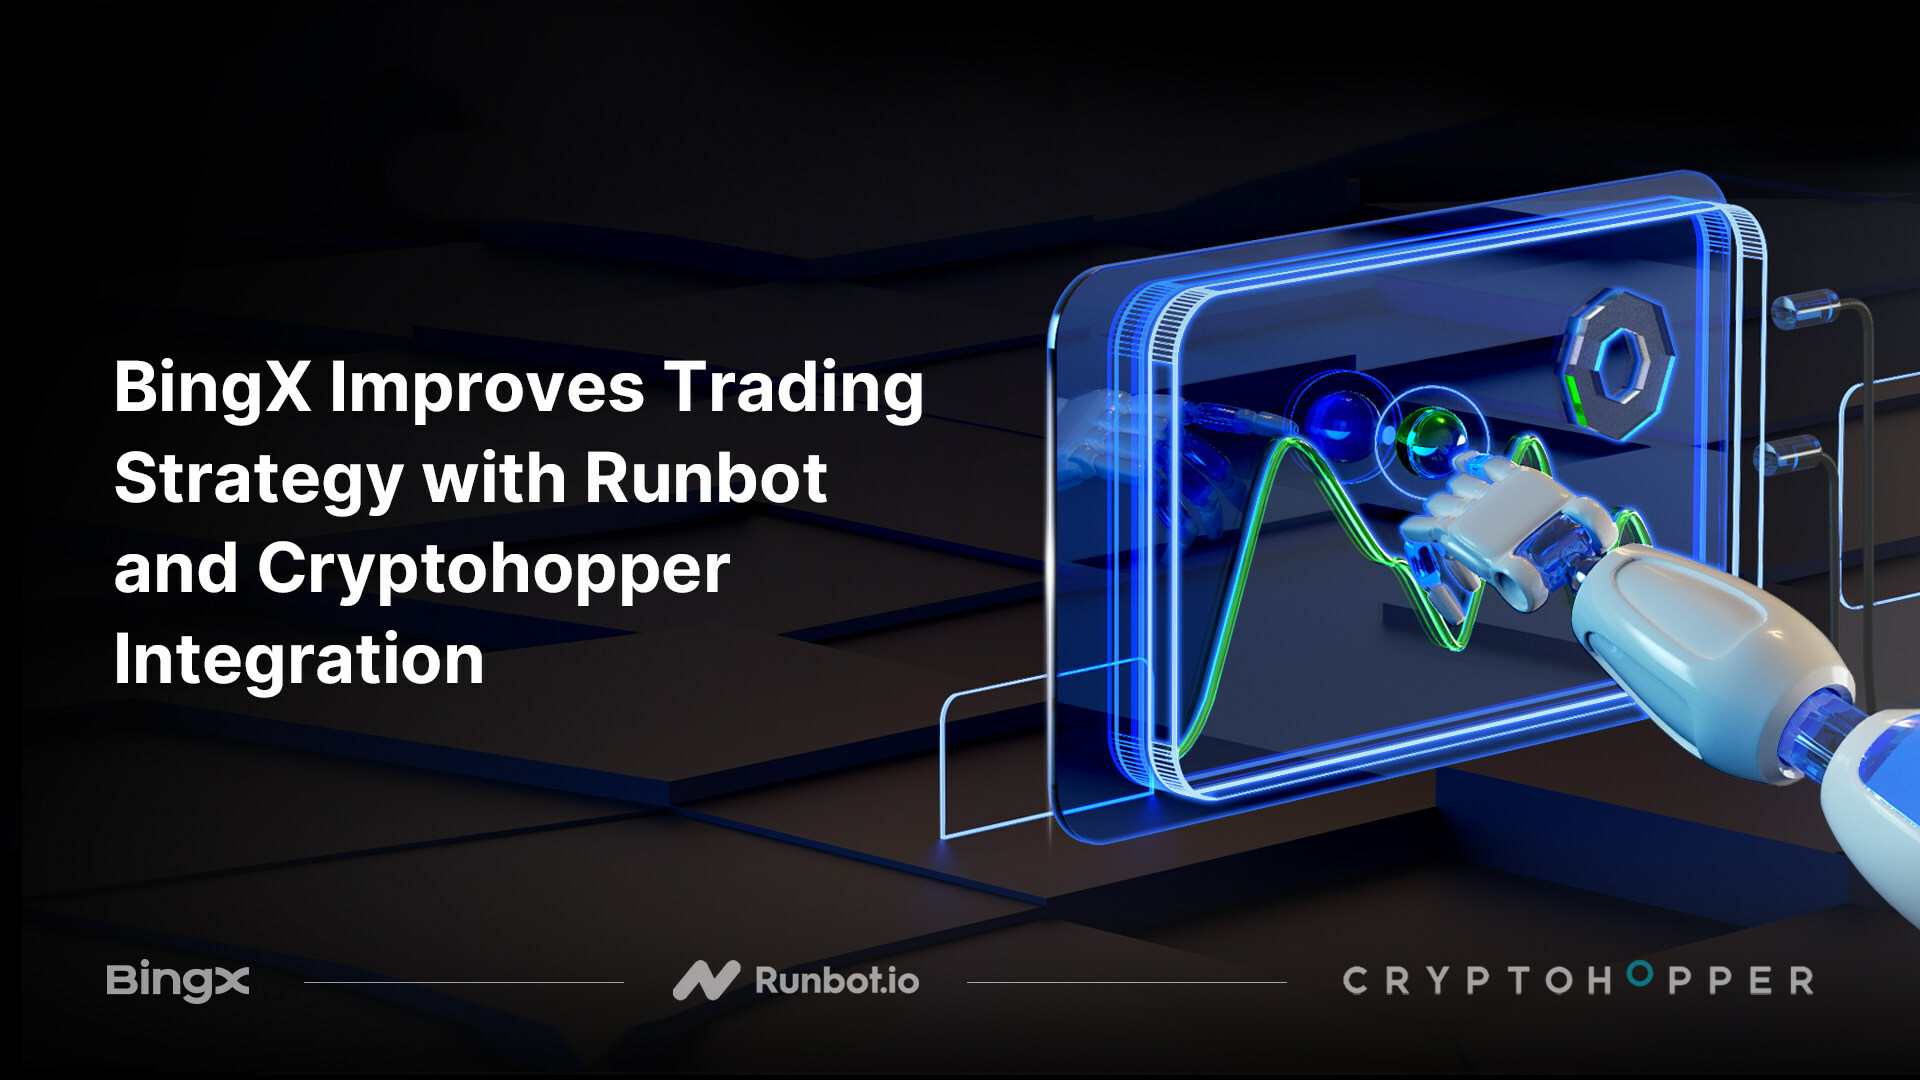 BingX Improves Trading Strategy with Runbot and Cryptohopper Integration Image